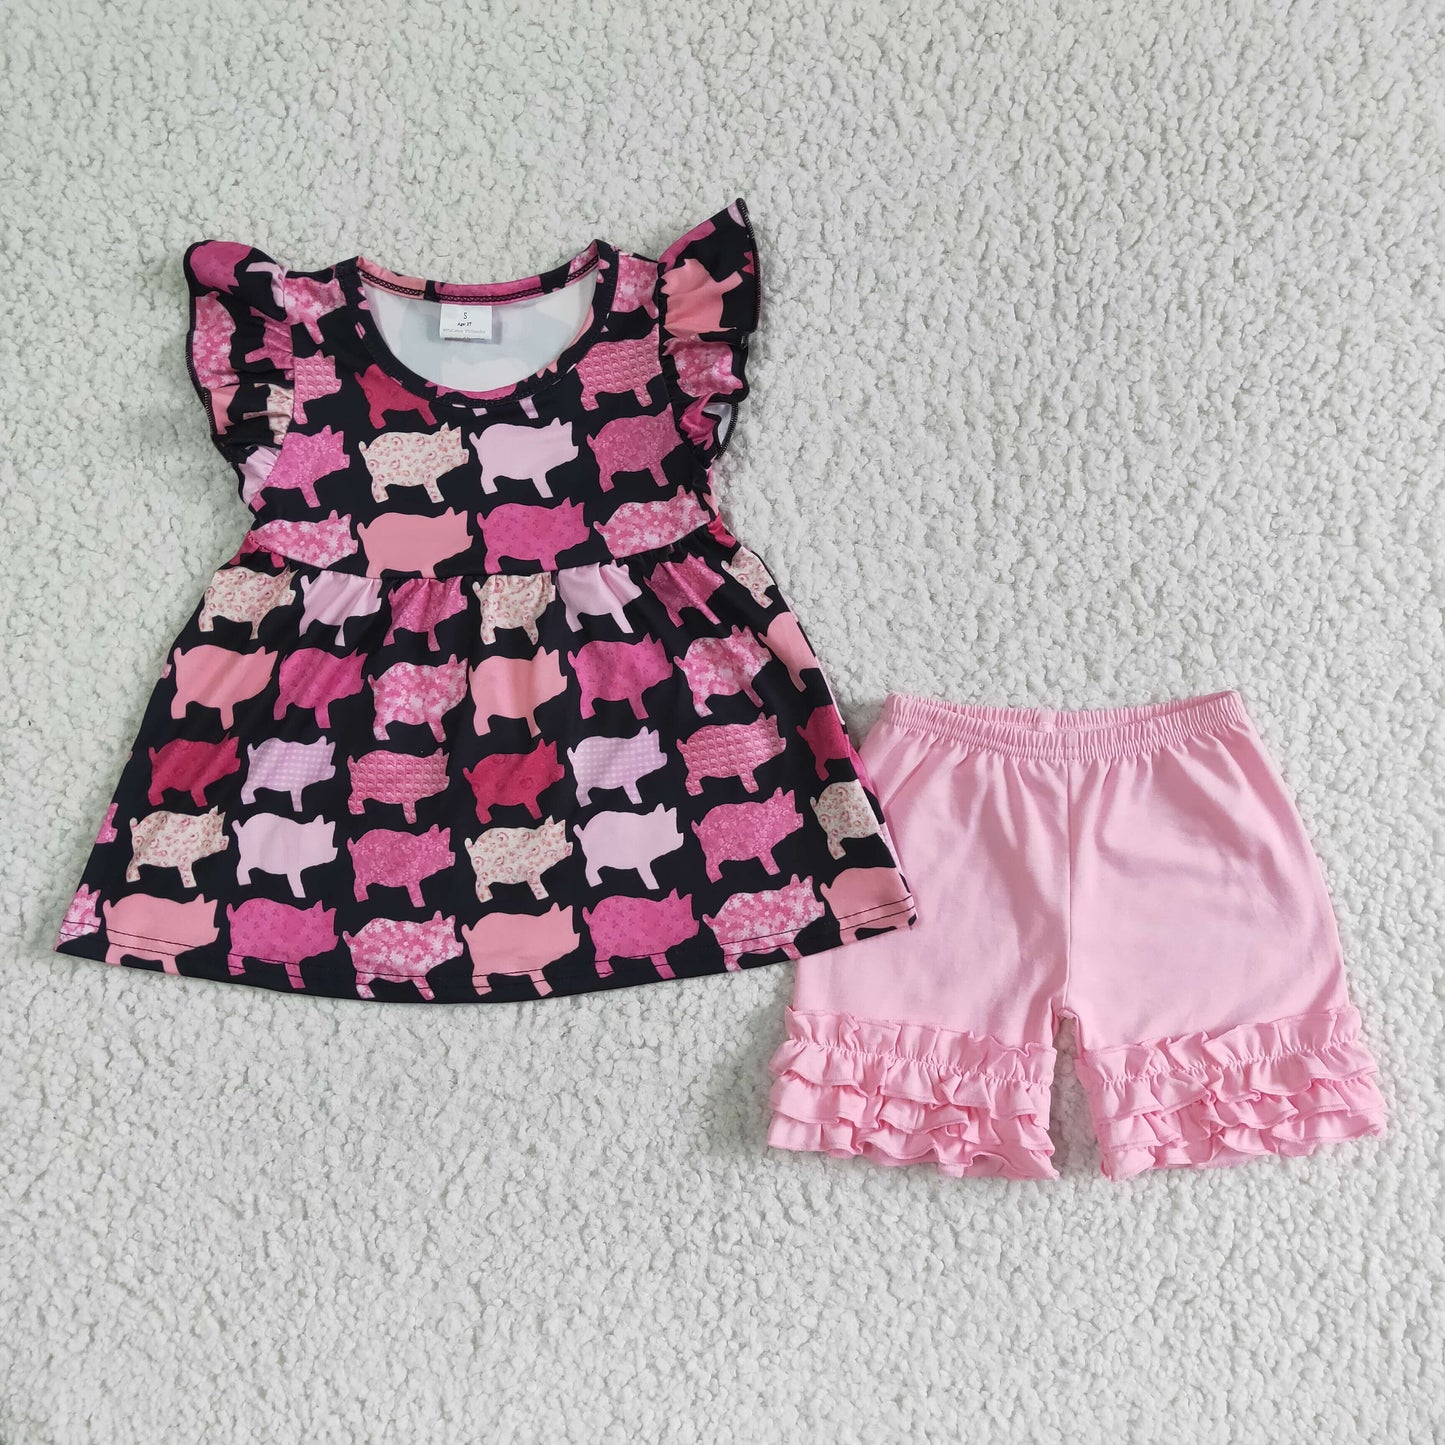 C11-6 Xiao Fei Sleeve Pink Pig Shorts